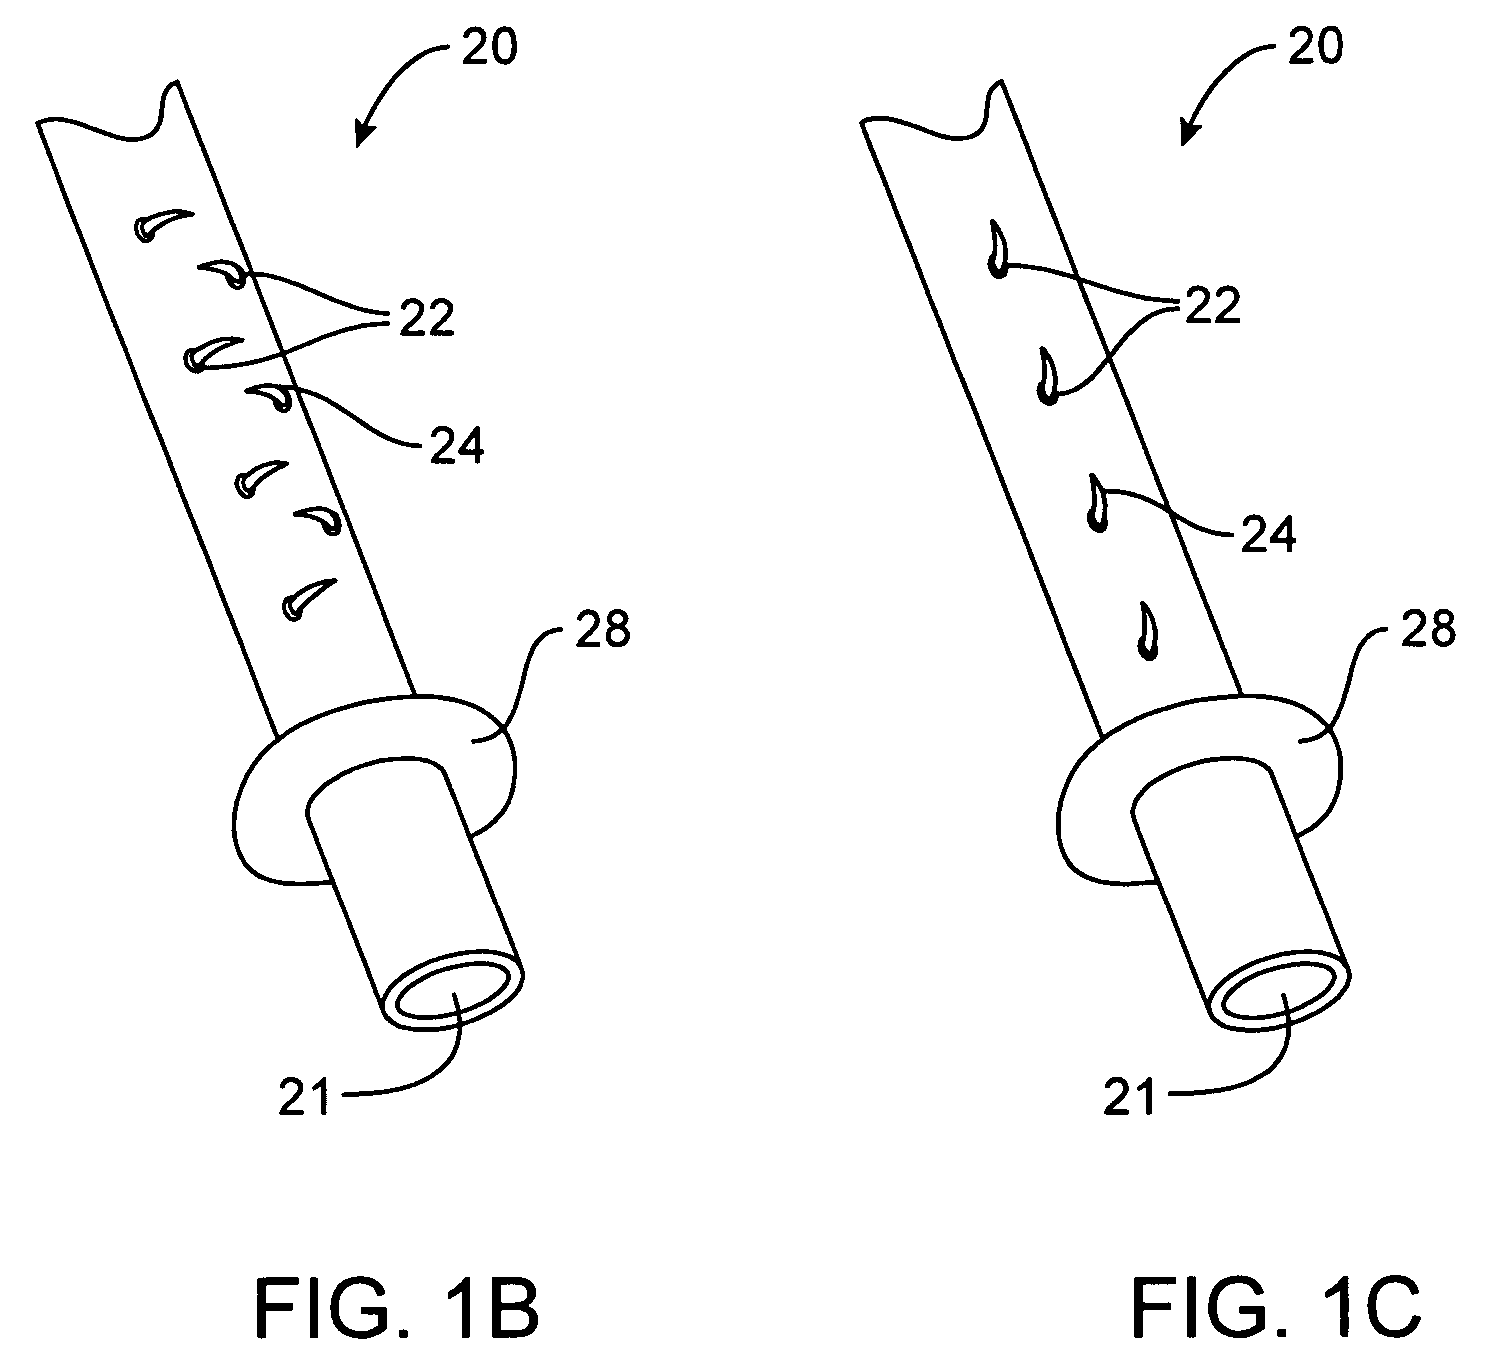 Methods and apparatus for performing endoluminal gastroplasty